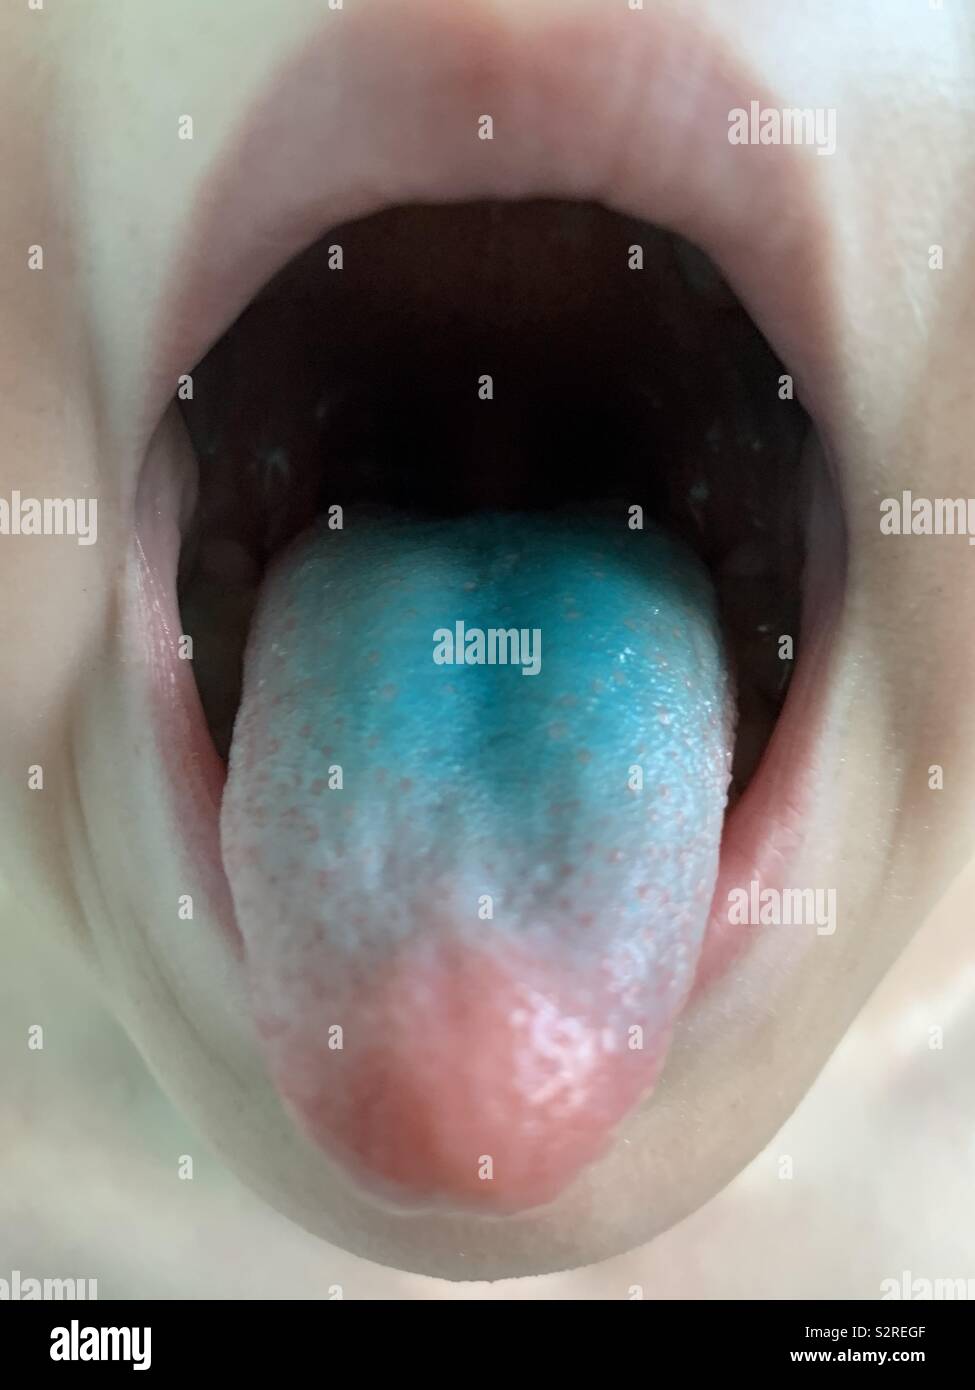 Blue tongue from eating sweets Stock Photo